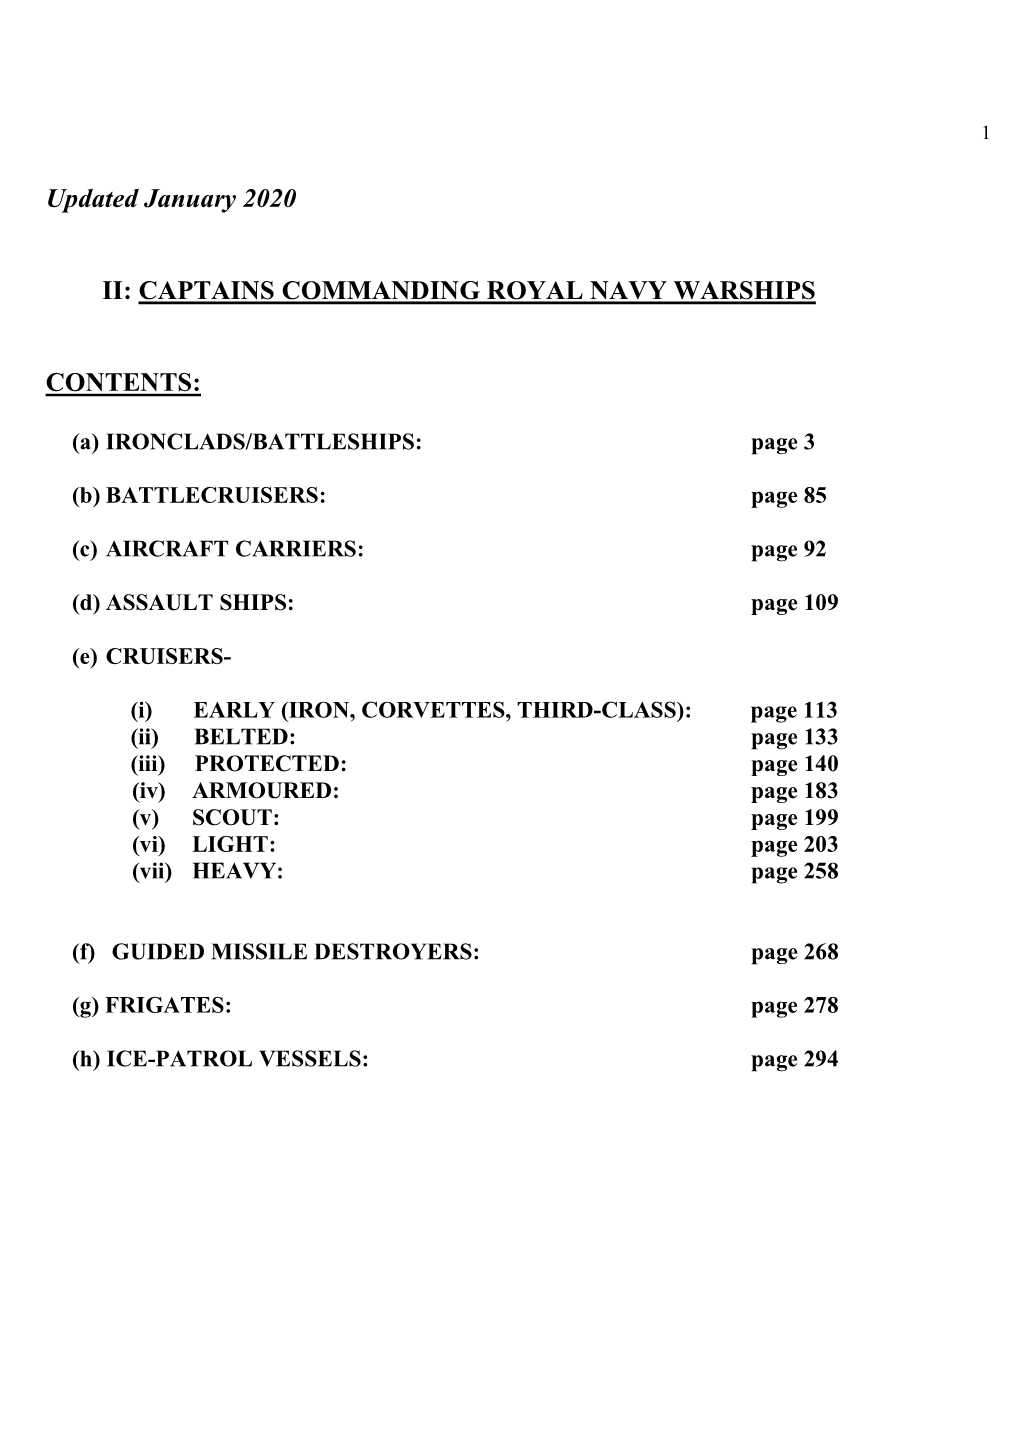 Updated January 2020 II: CAPTAINS COMMANDING ROYAL NAVY WARSHIPS CONTENTS